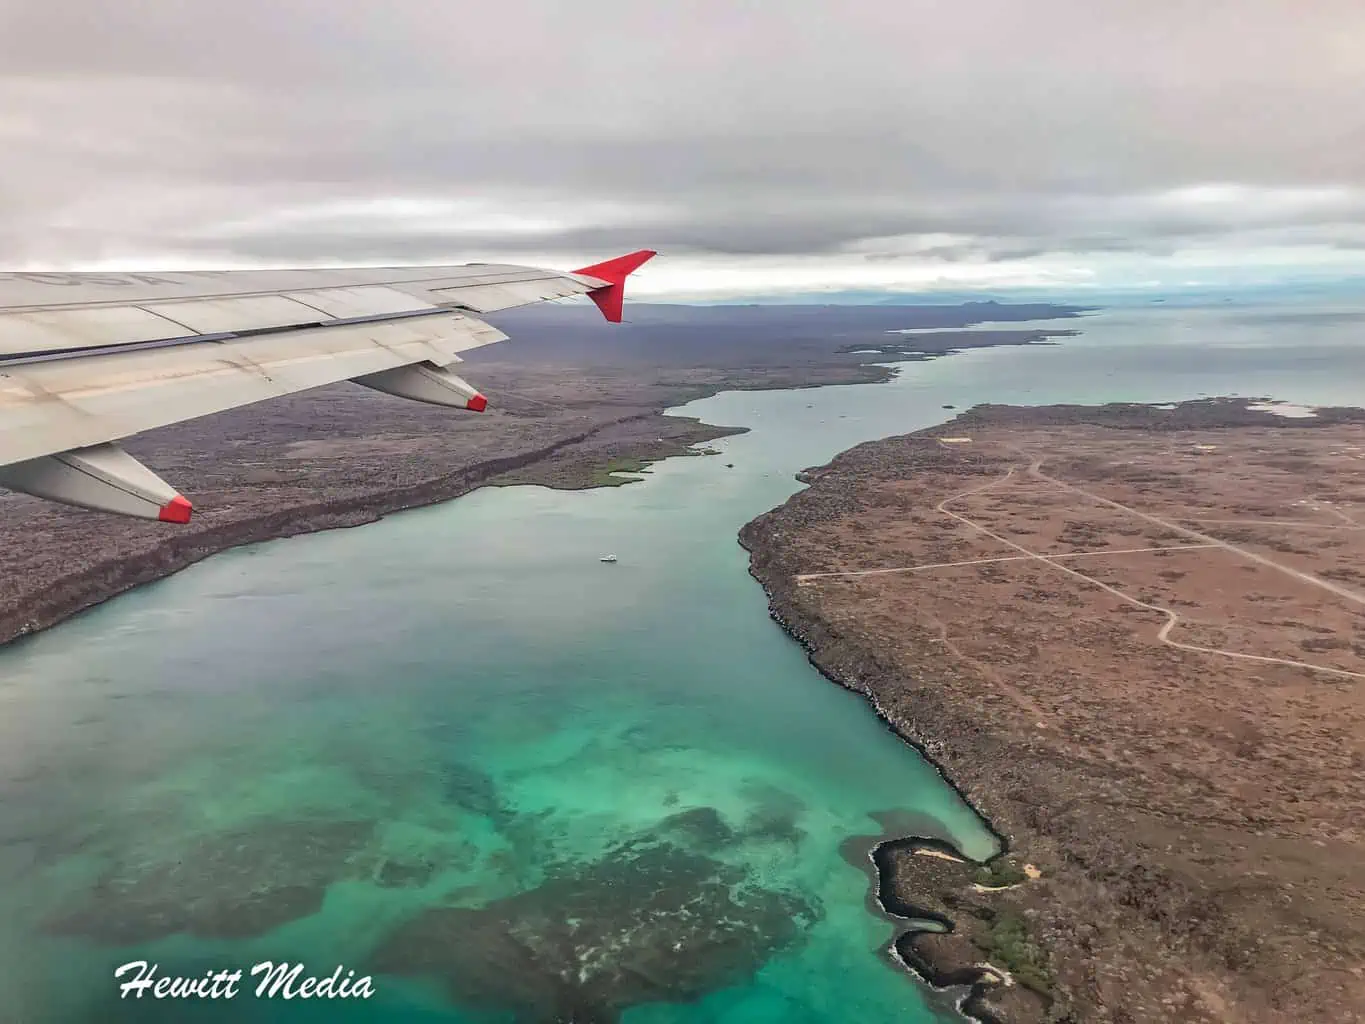 Getting to the Galapagos Islands